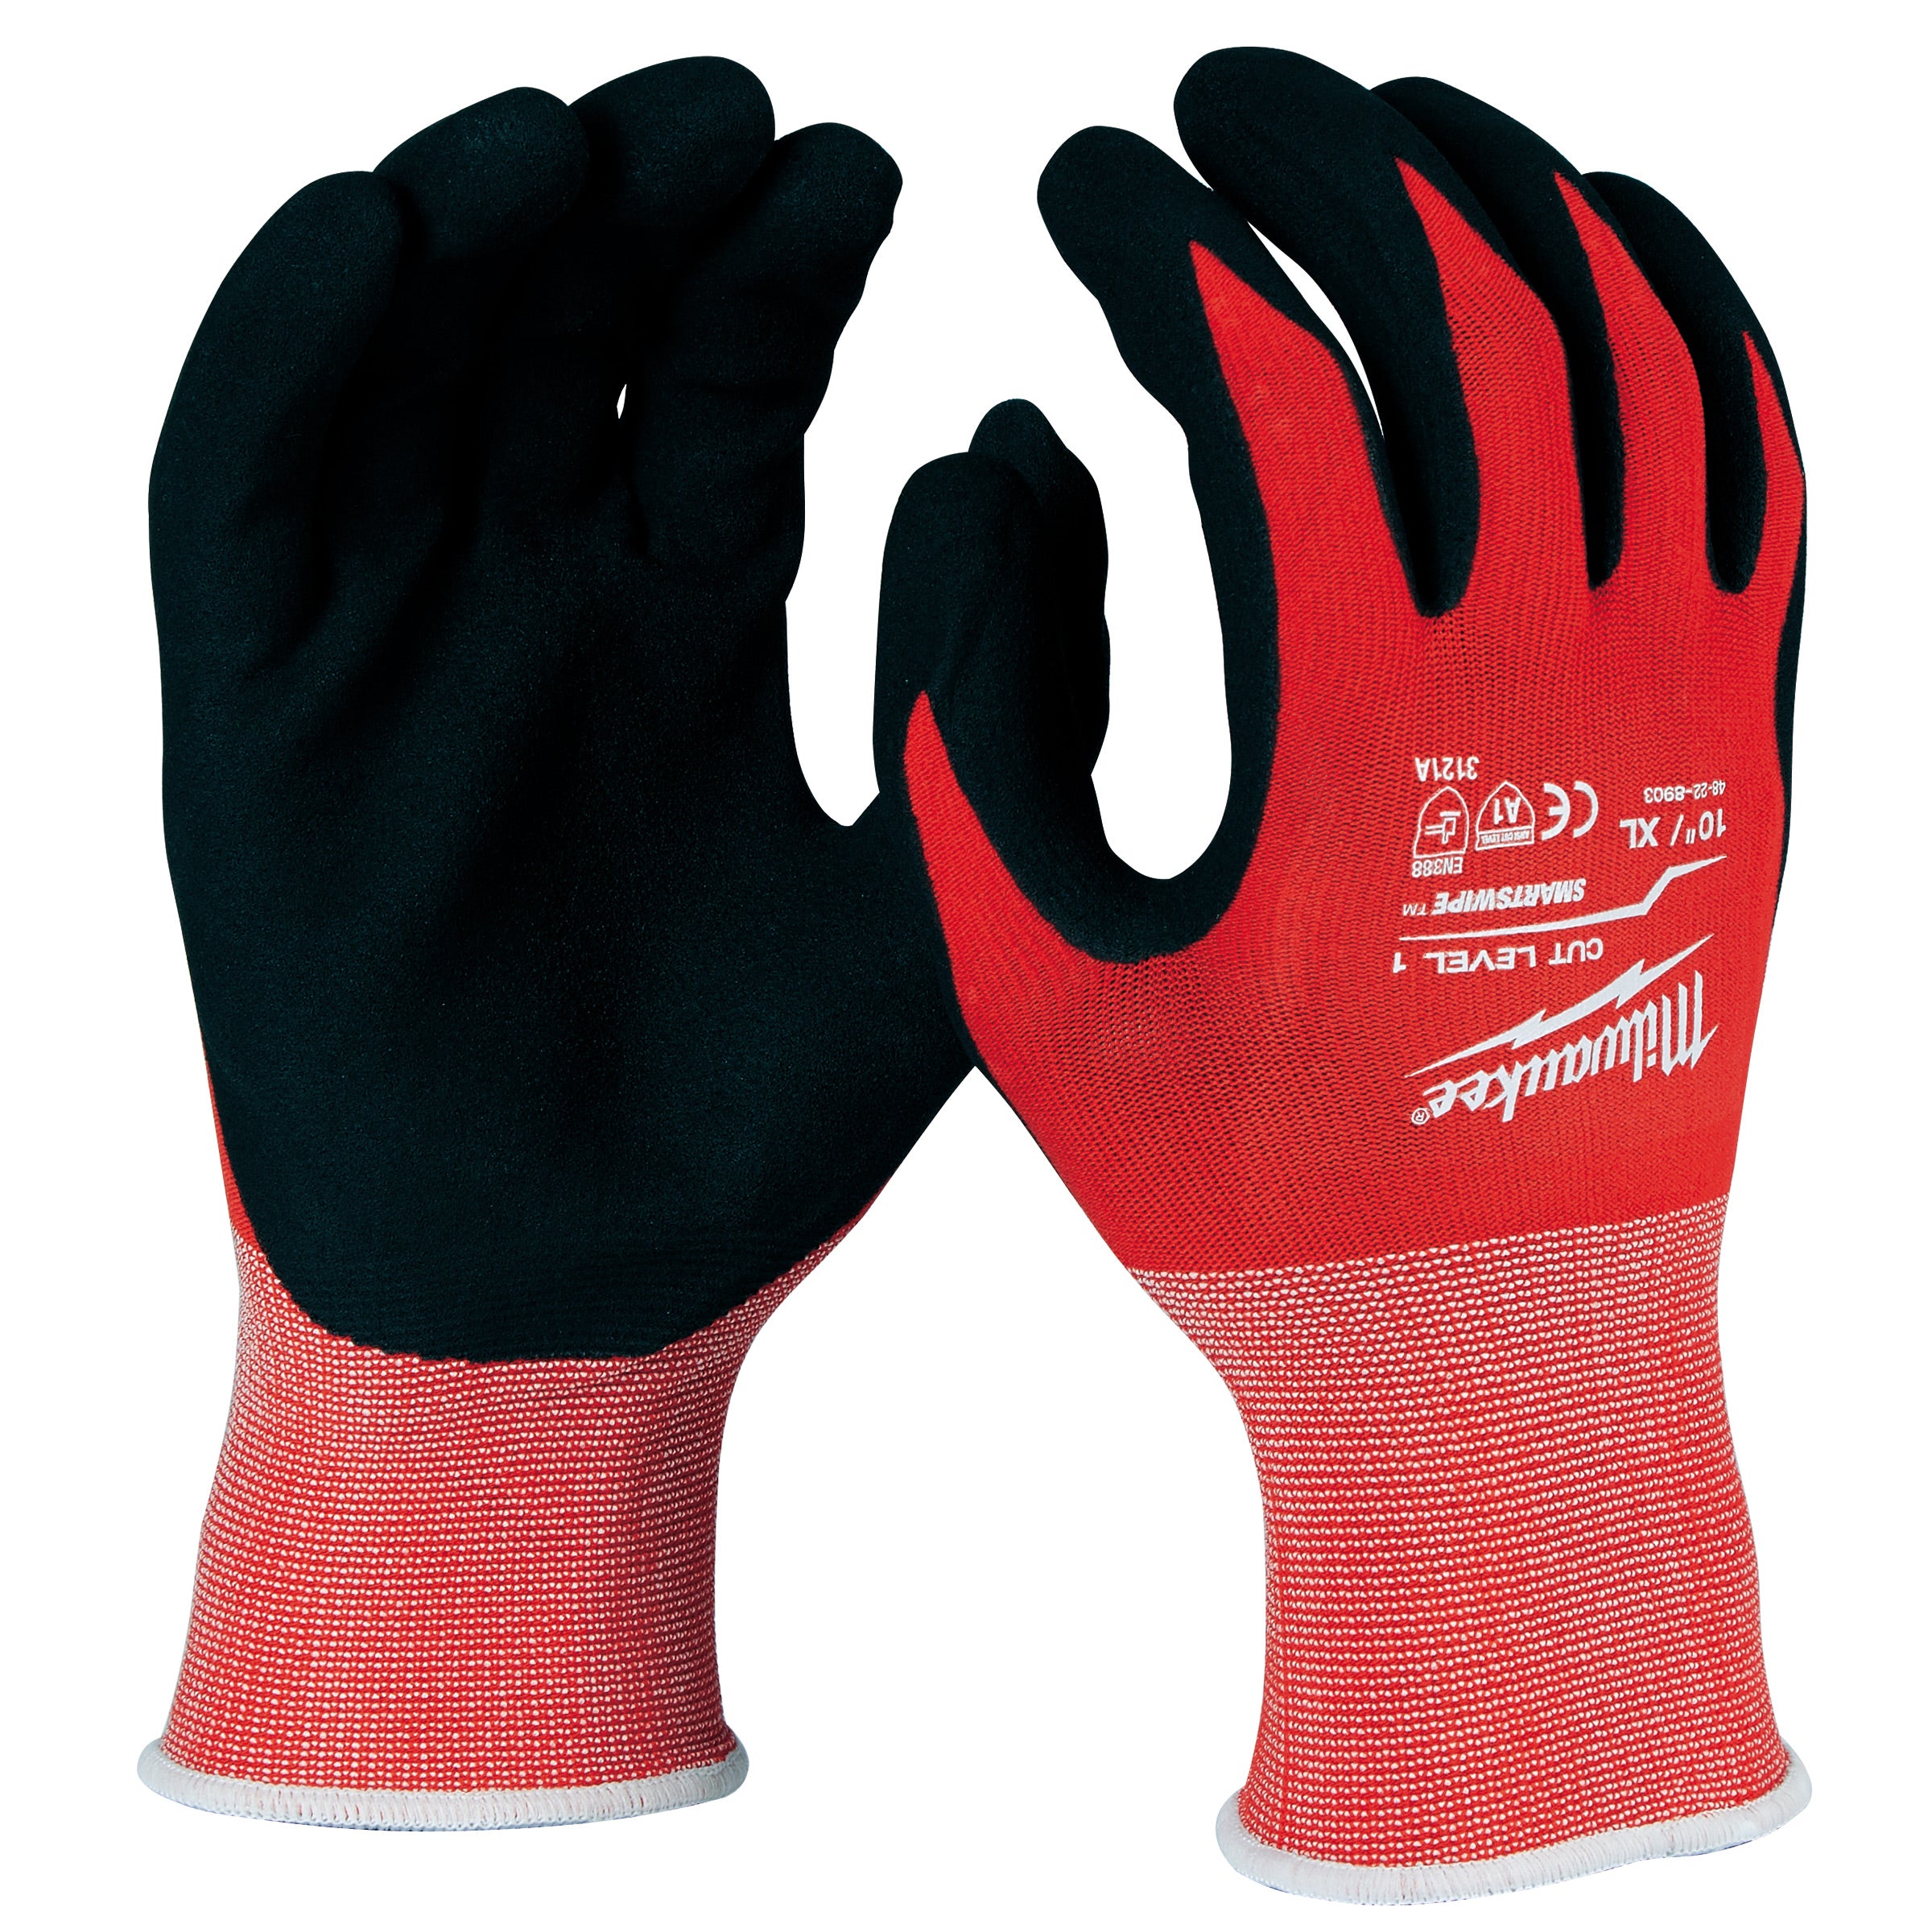 Milwaukee Cut-Resistant Dipped Gloves Cut Level 1 Size XL 4932471418